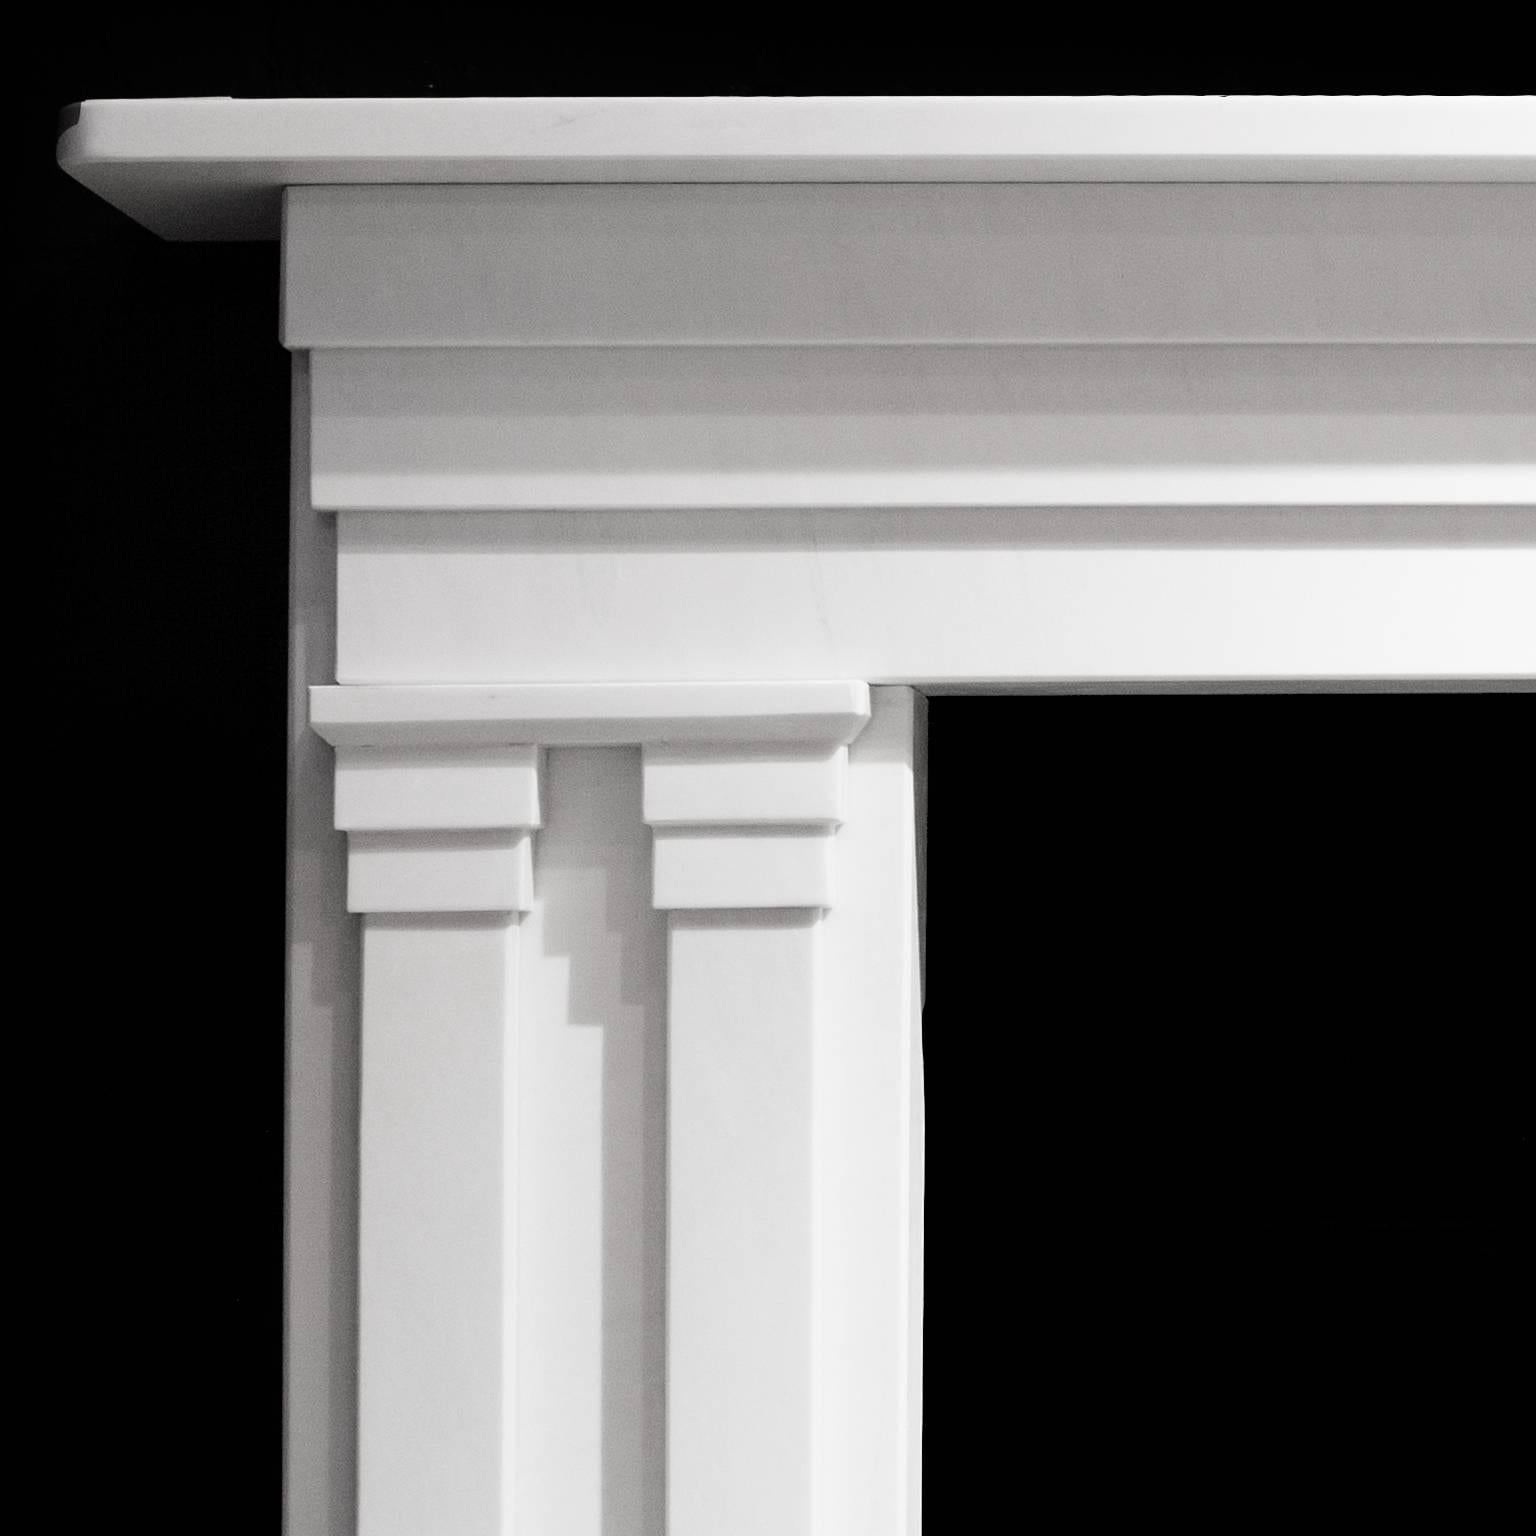 Late Georgian, early Victorian style English made fireplace mantel.
English made with impressive white limestone.
Hand-carved with columns giving an elegant understated appearance.